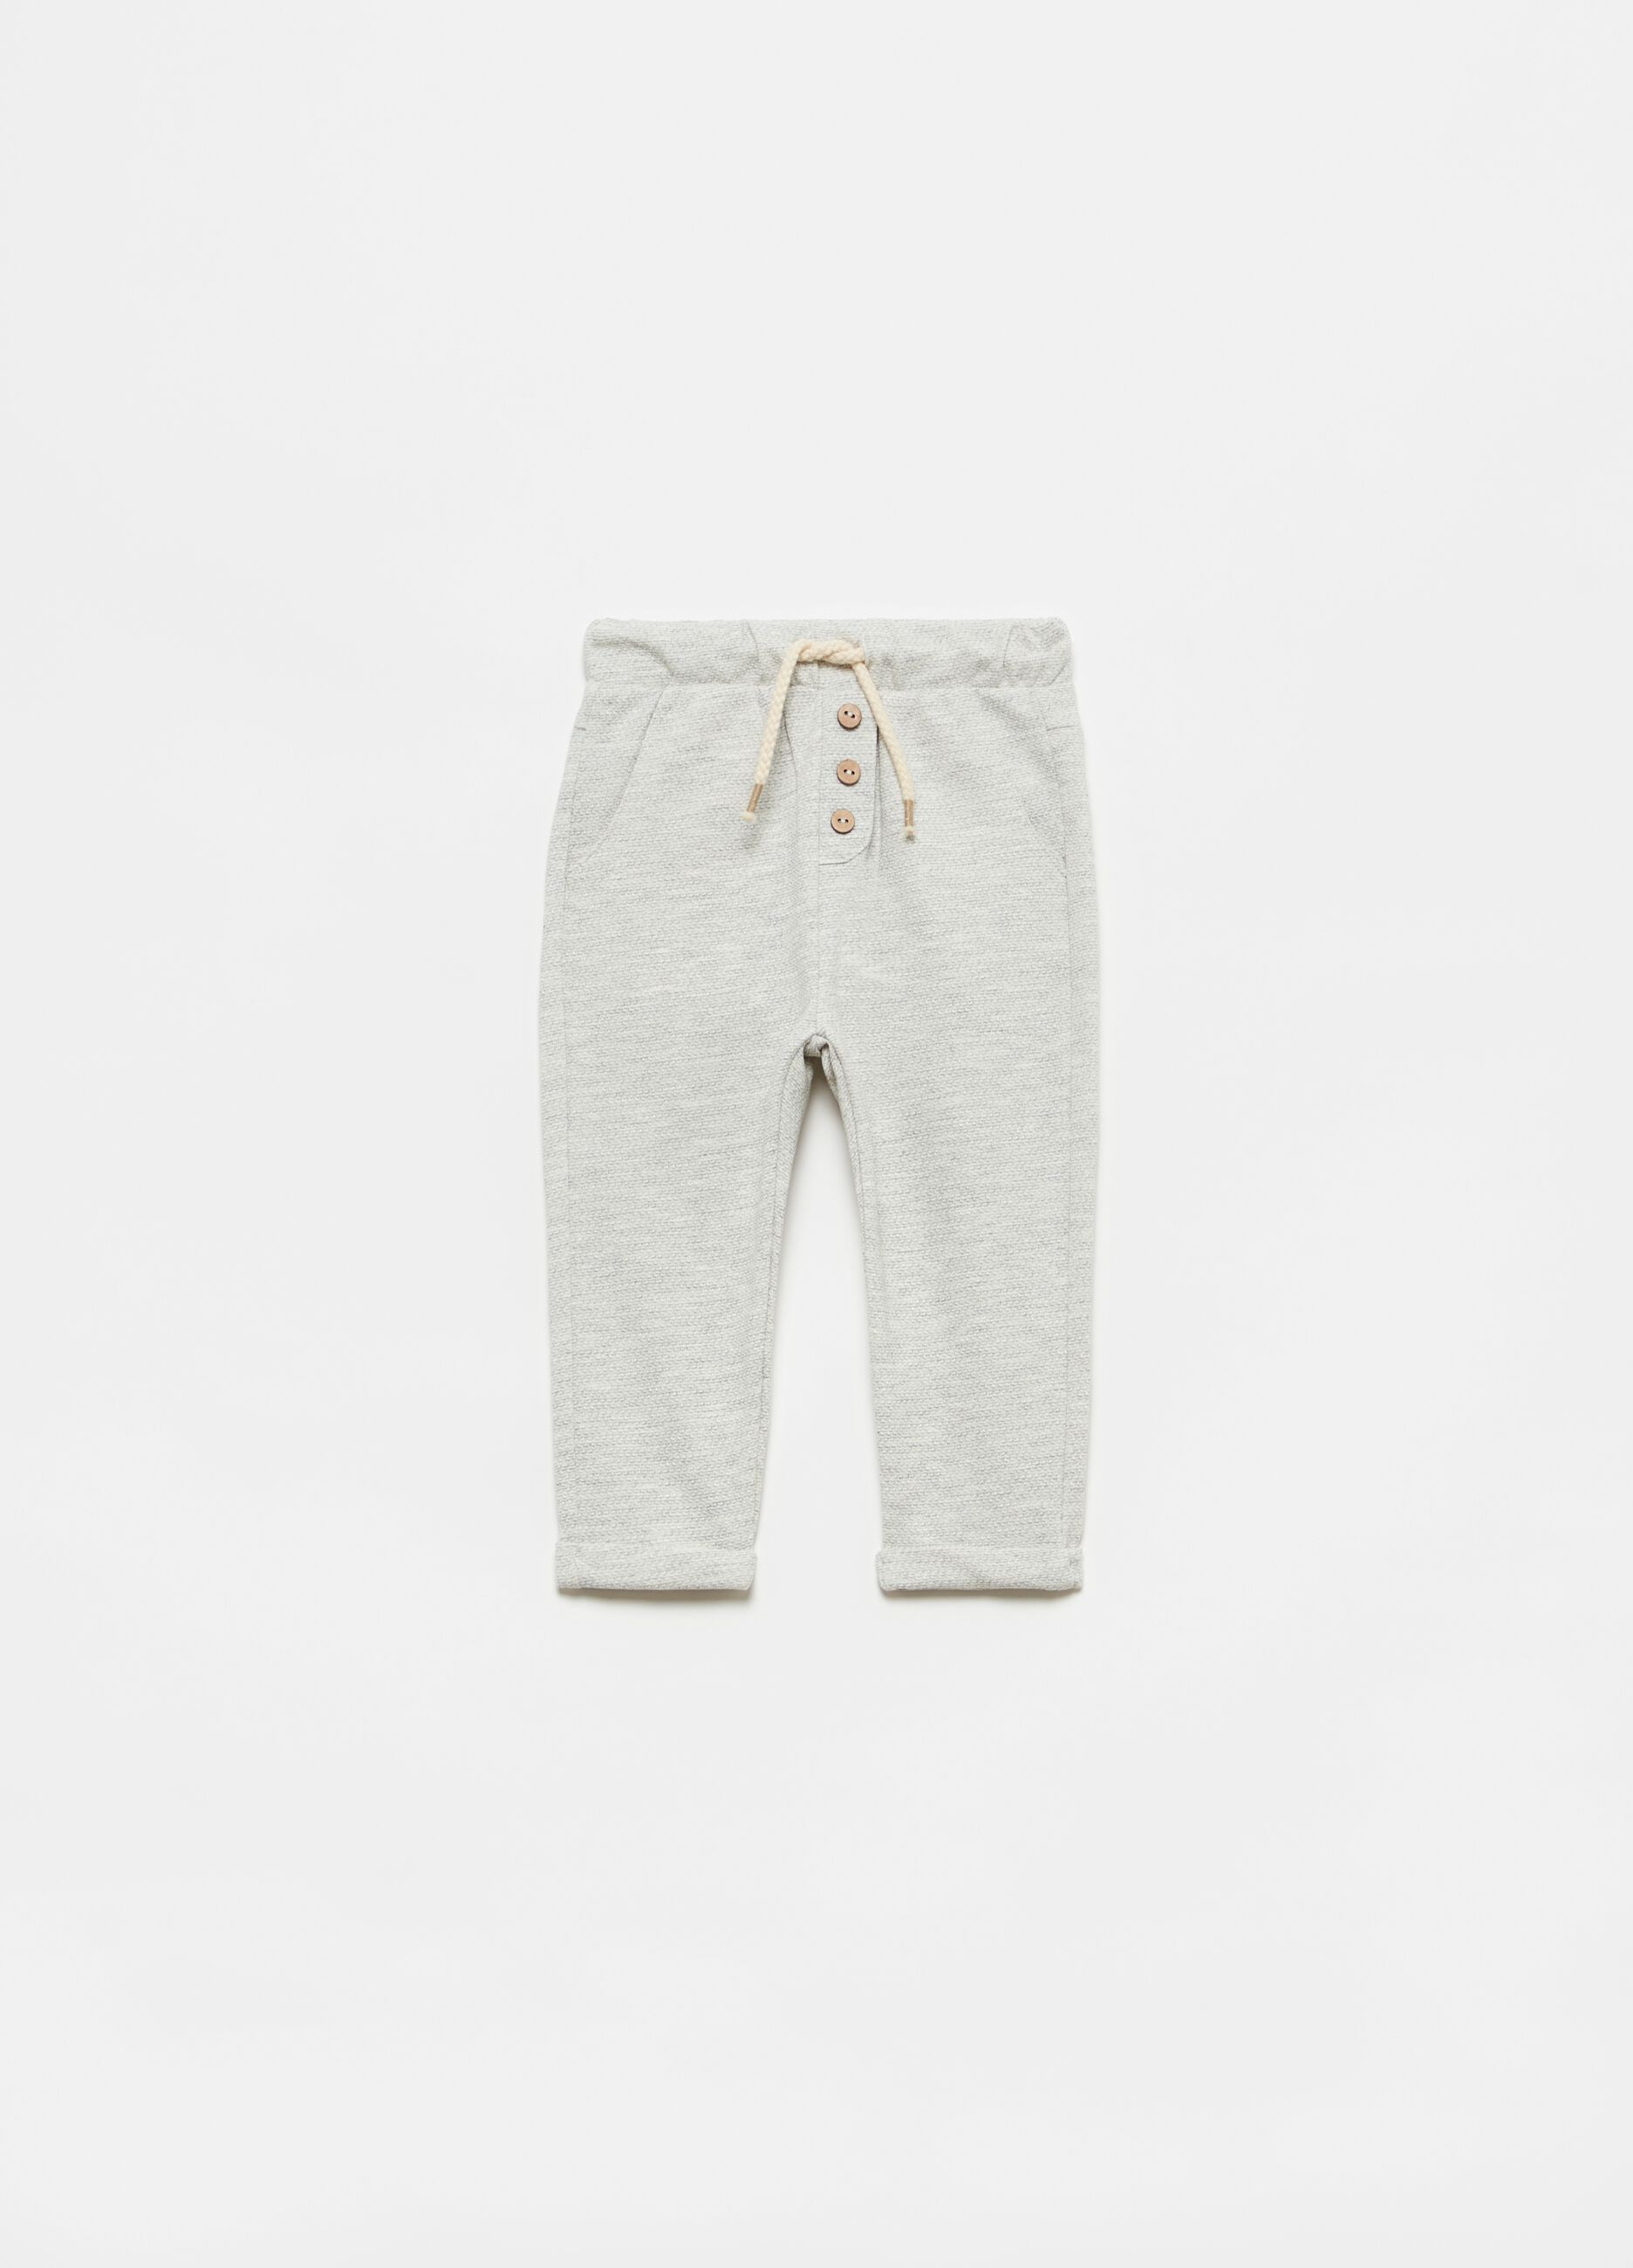 Joggers with drawstring and small buttons